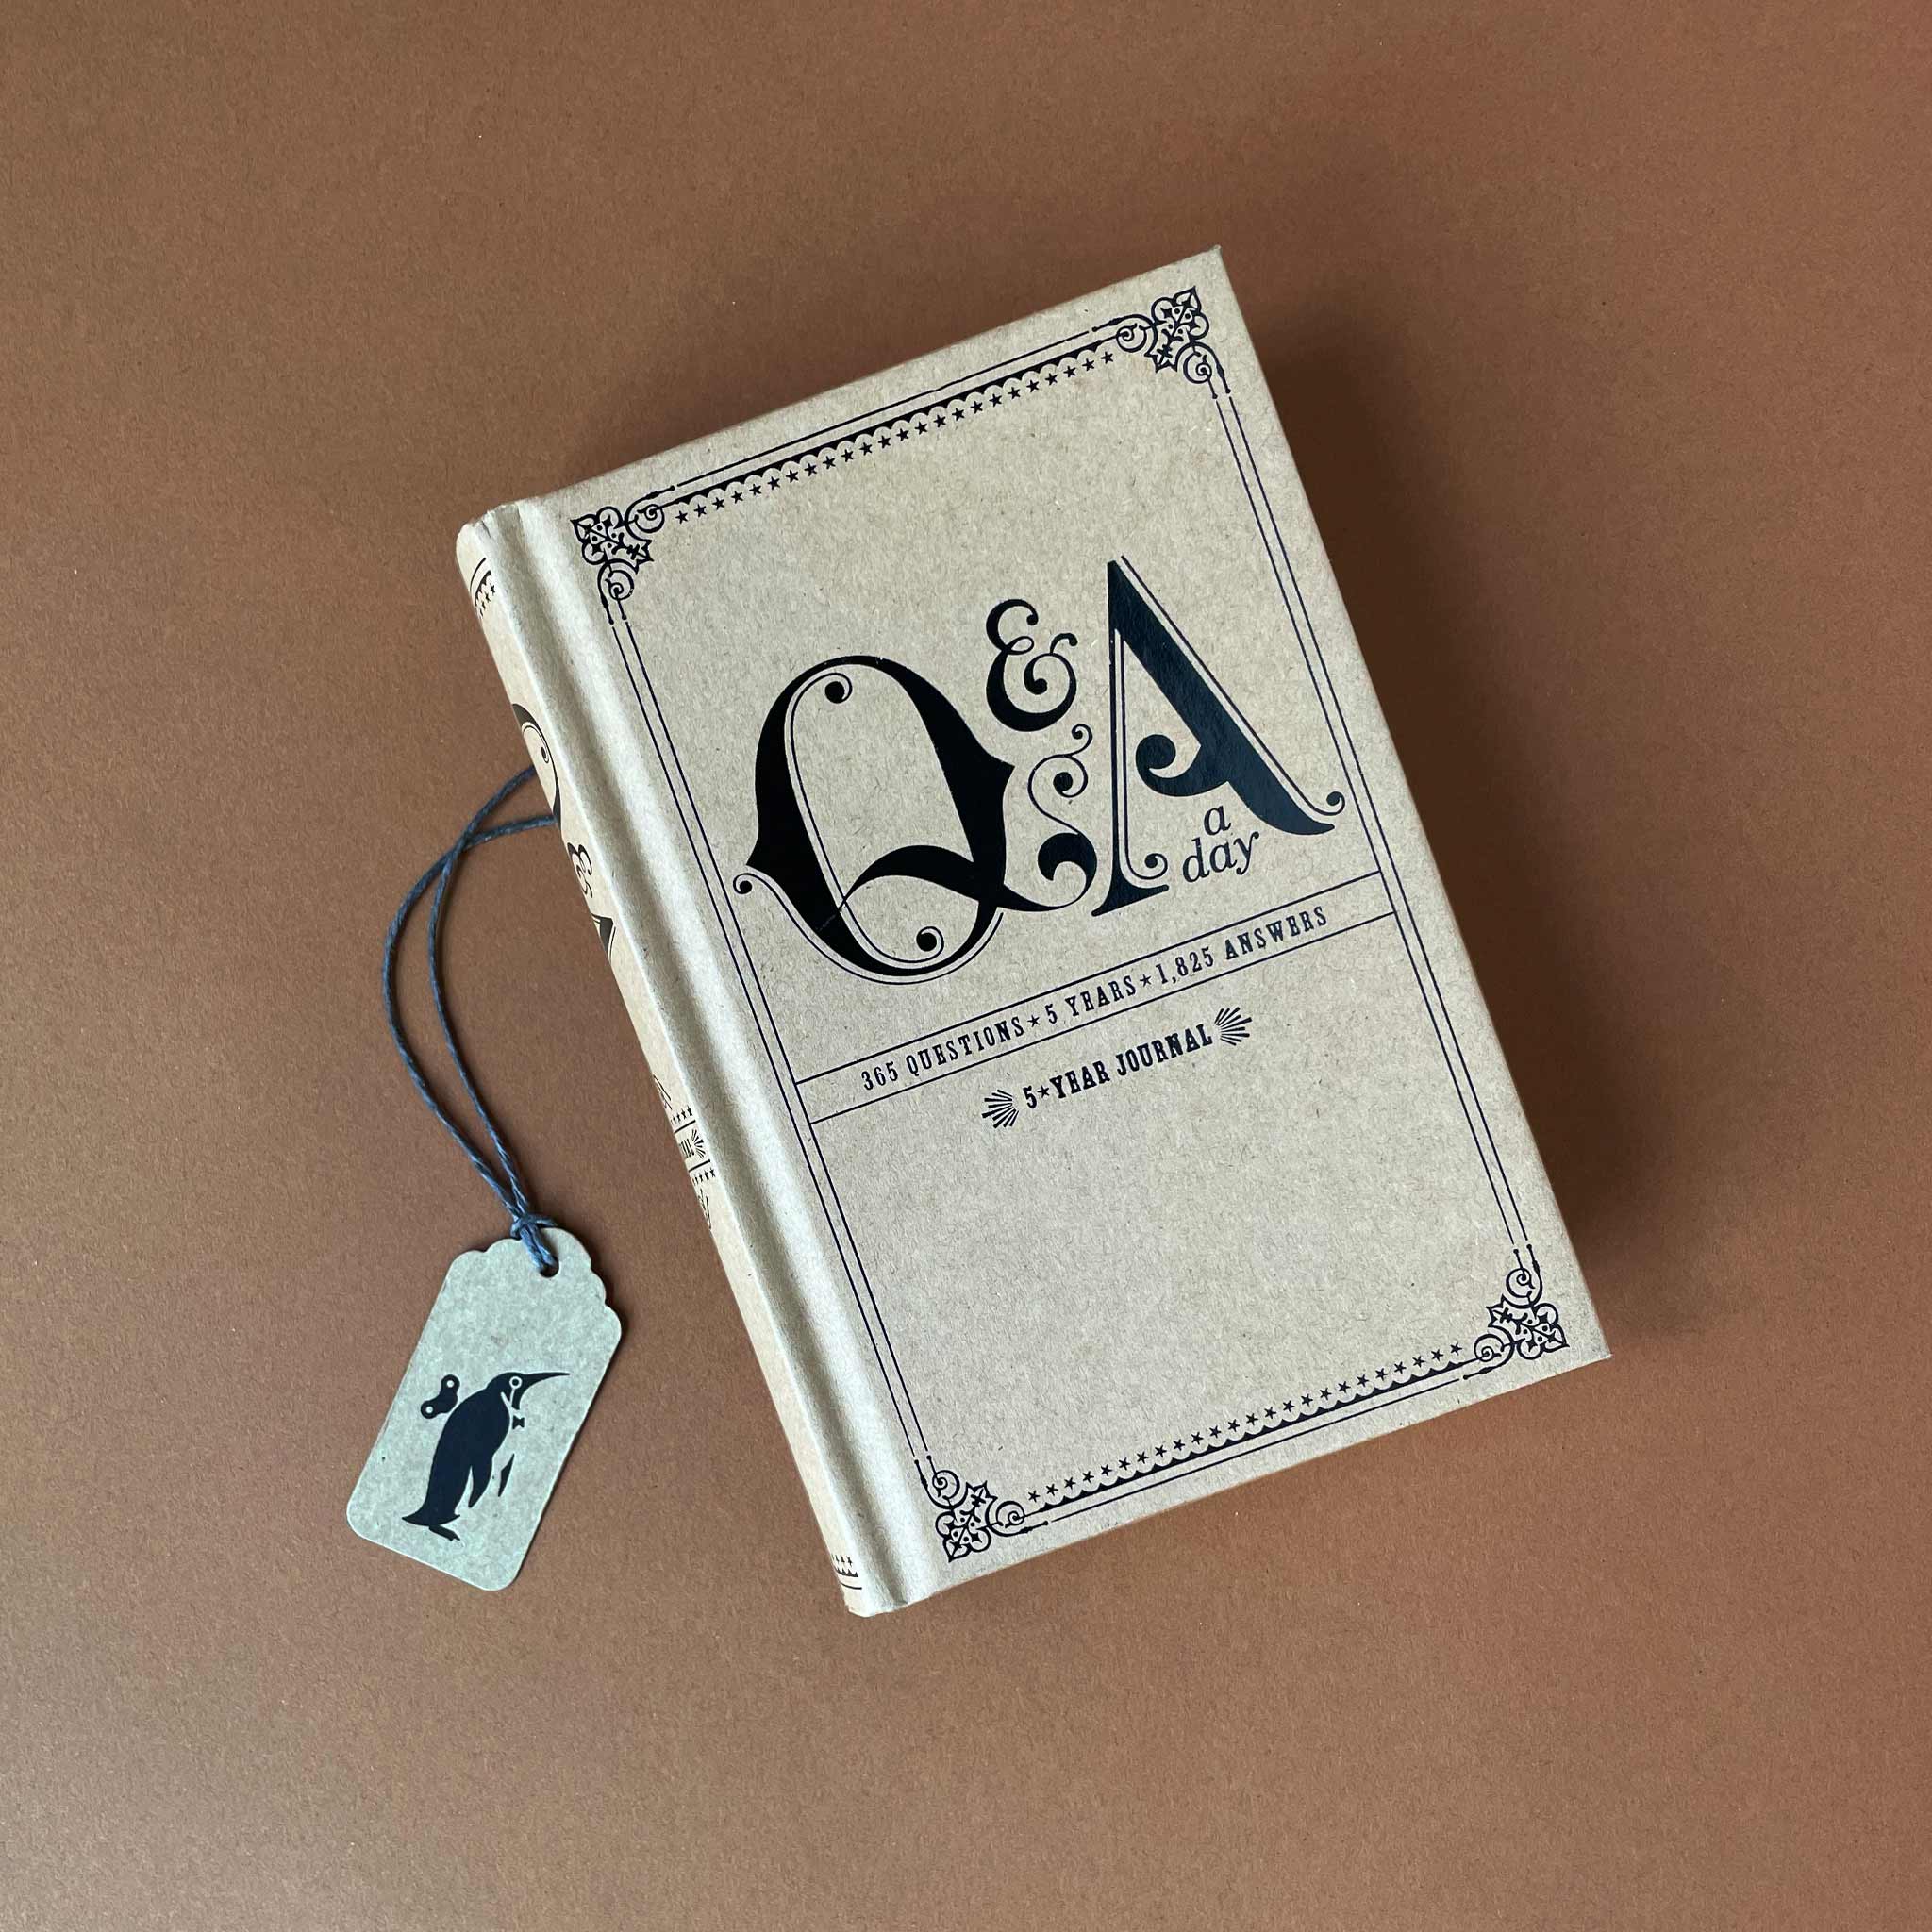 Q&A a Day 5 Year Journal